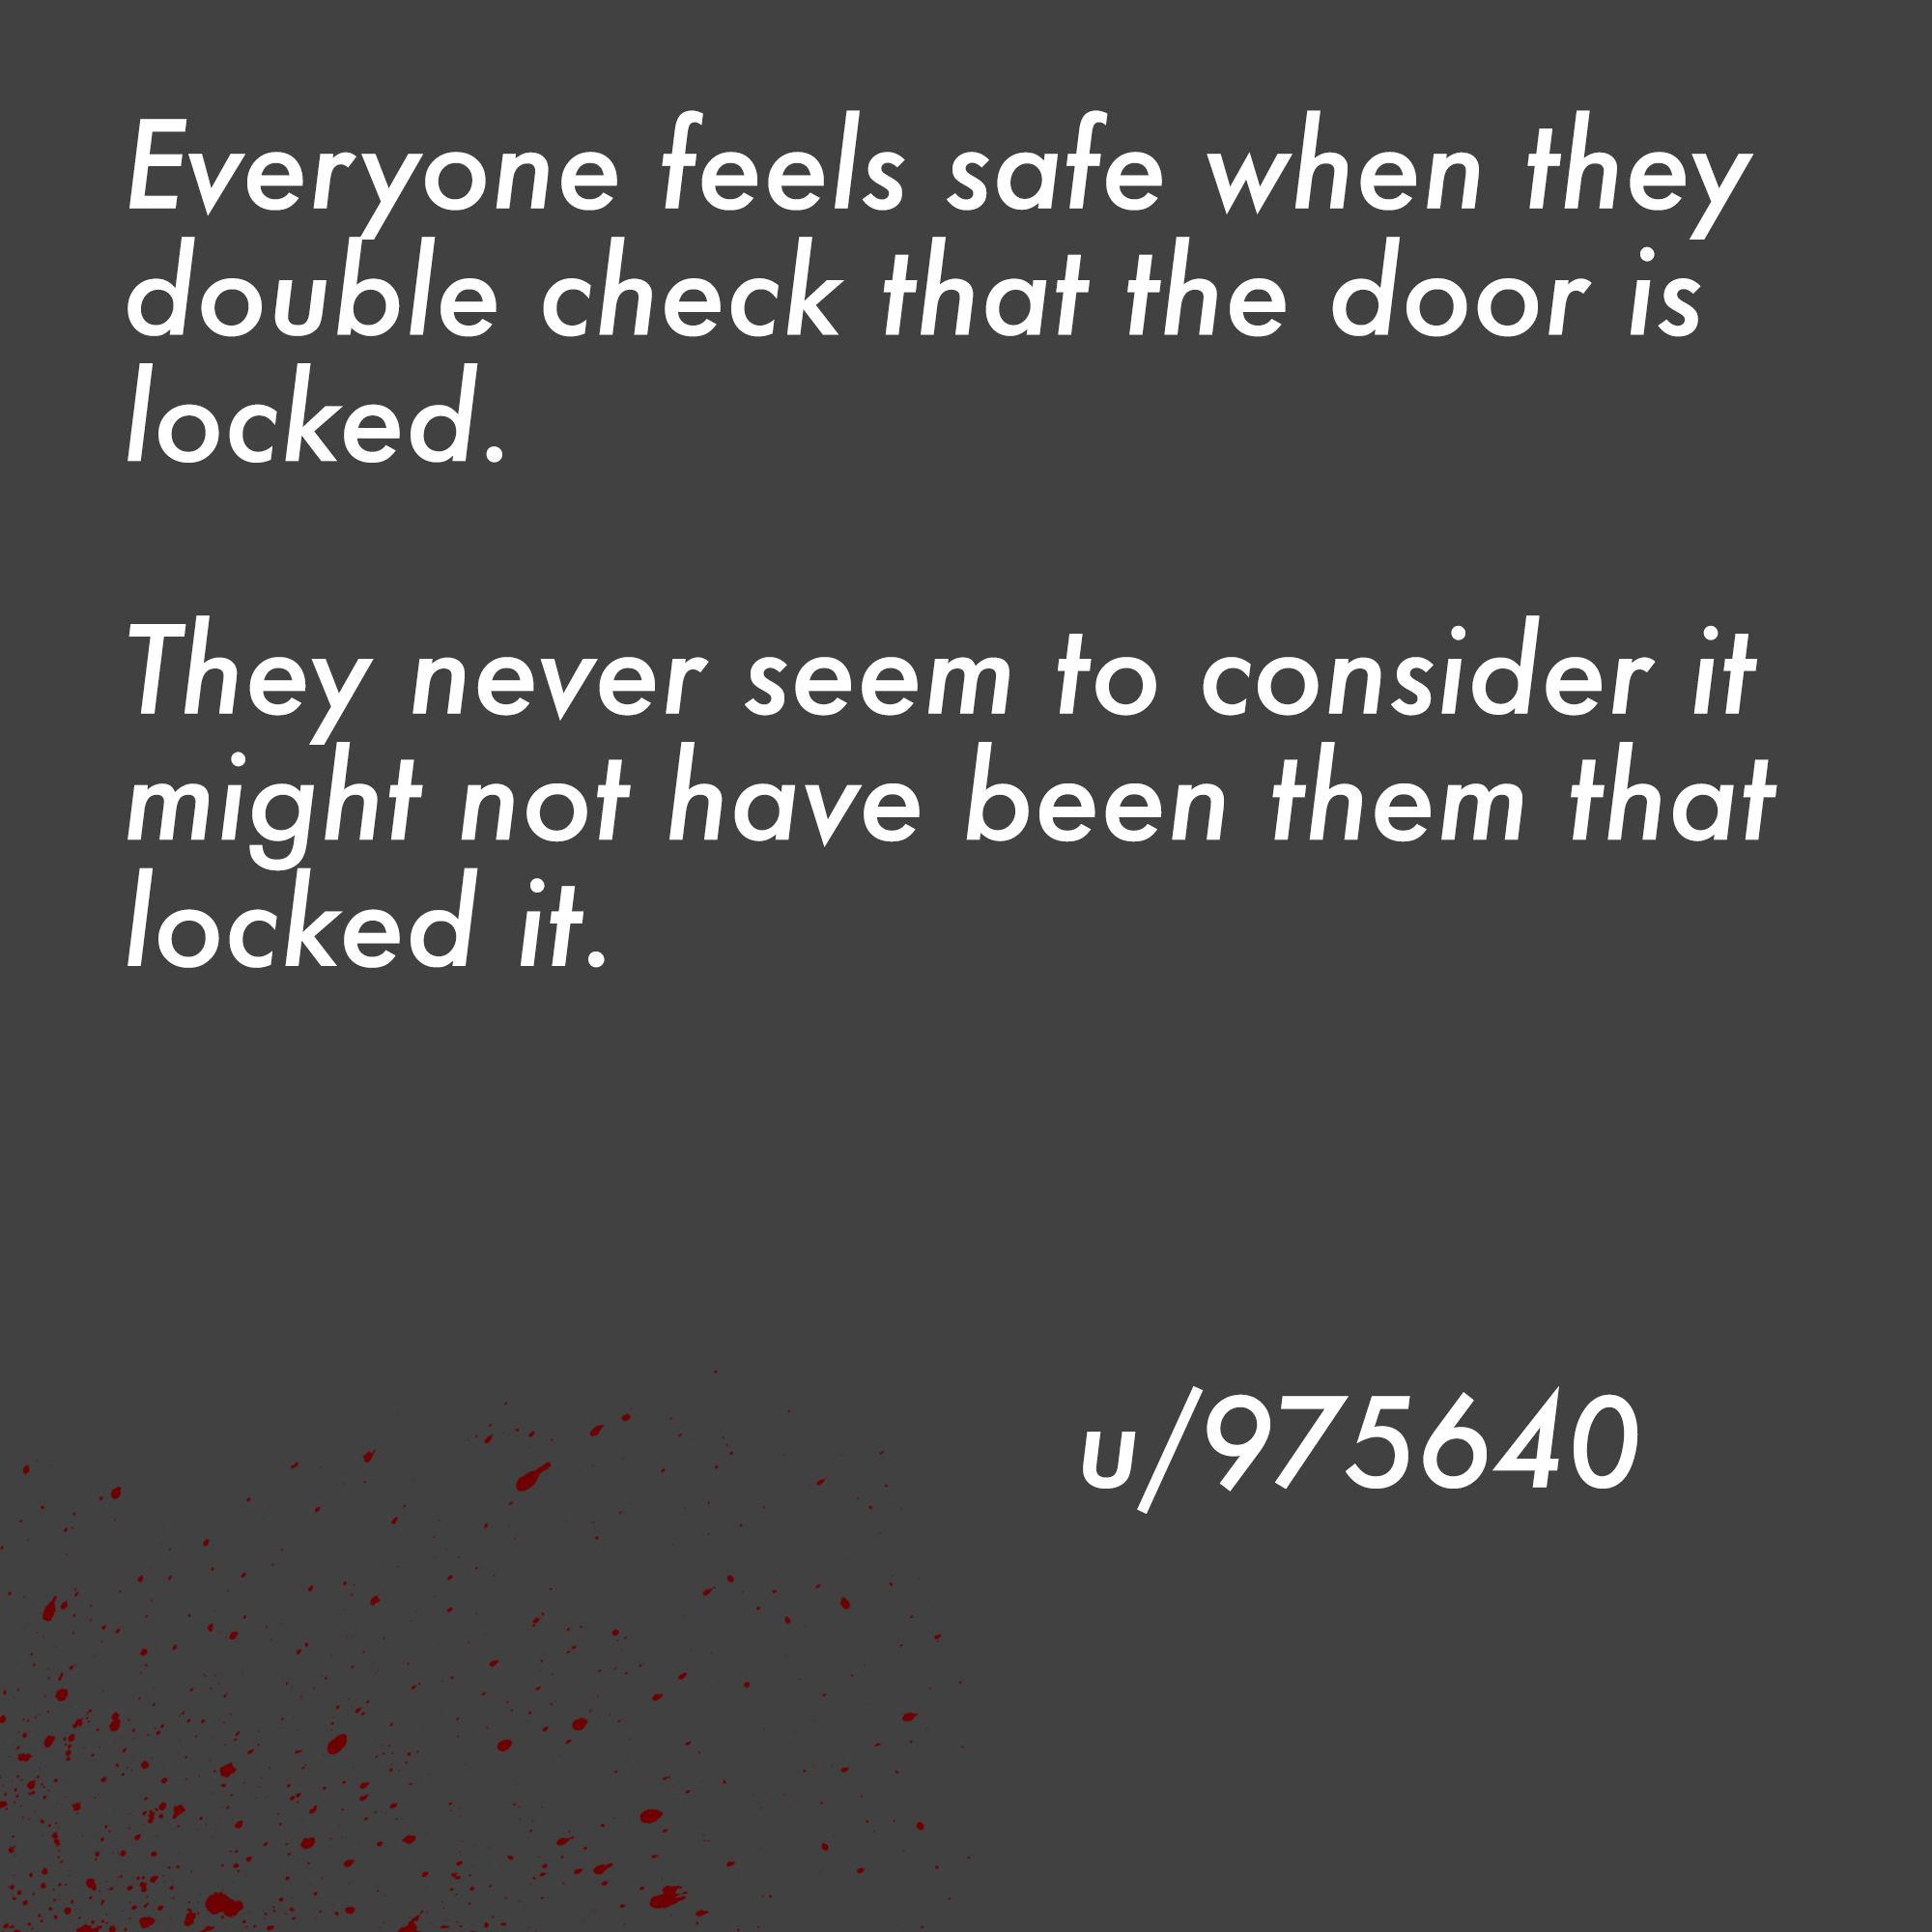 two line horror stories - angle - Everyone feels safe when they double check that the door is locked. They never seem to consider it might not have been them that locked it. u975640